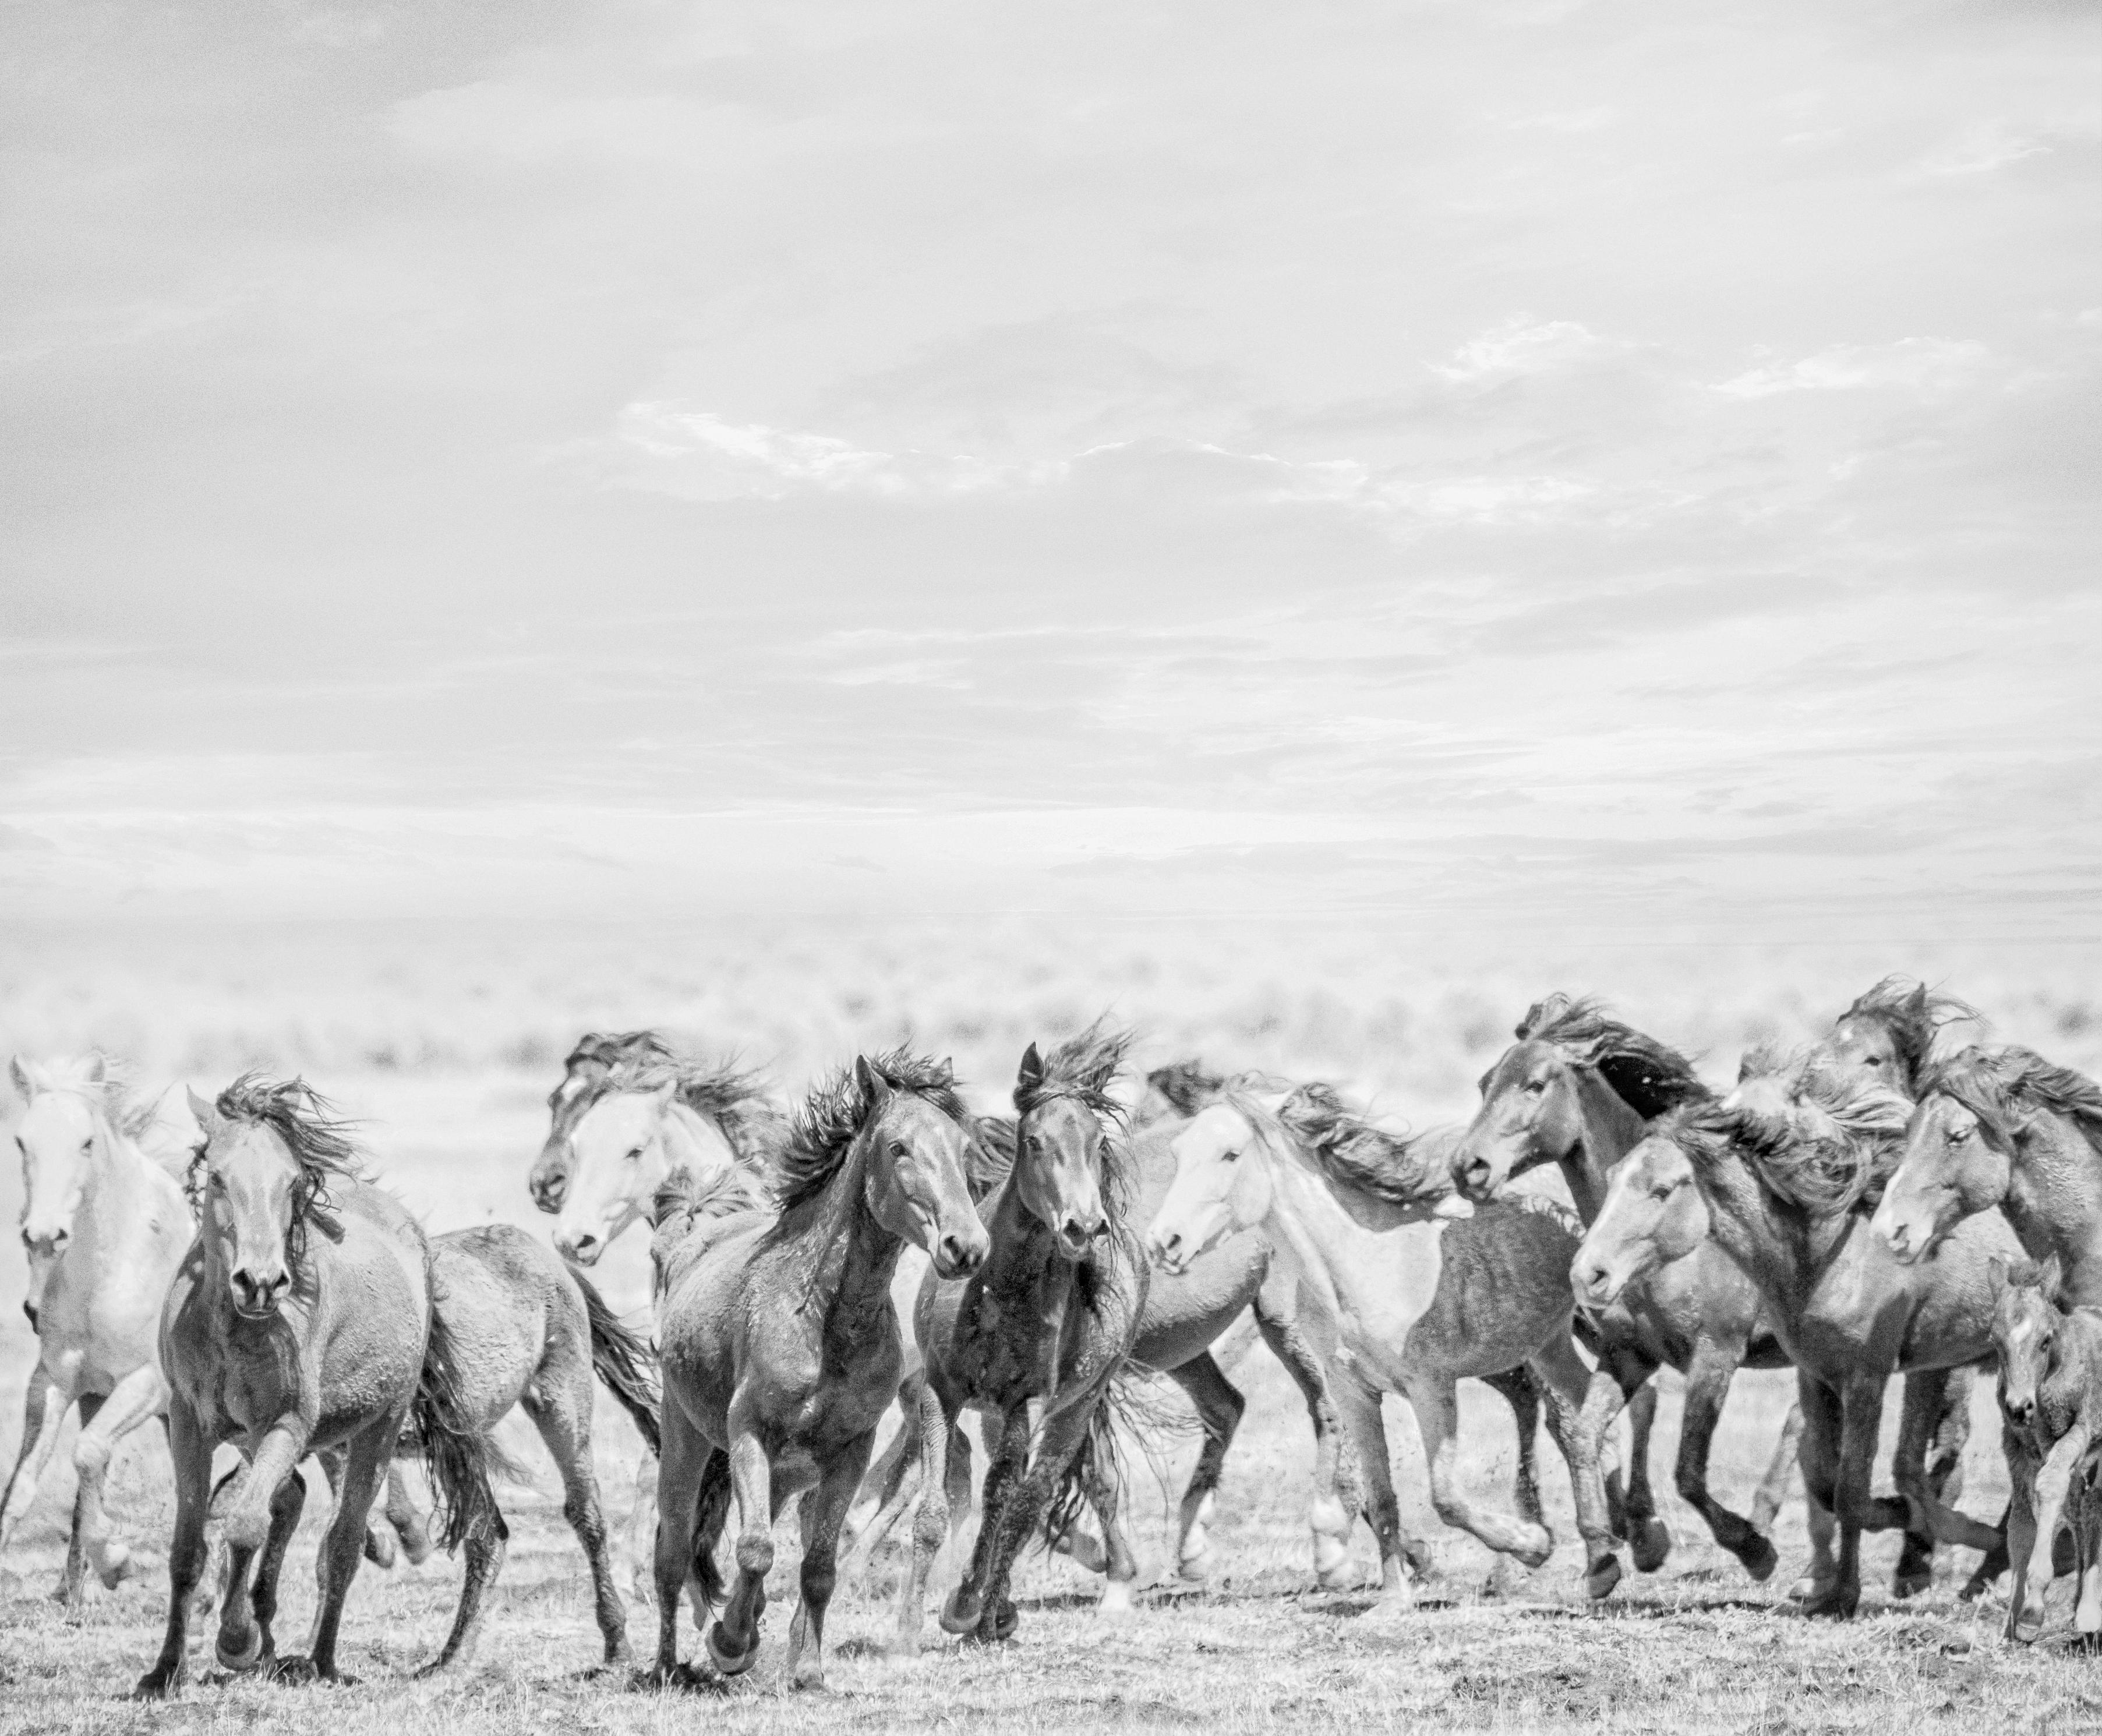 This is a contemporary  photograph of wild horses. 
"They represent the ultimate expression of American freedom"
28 x 40 Edition of 50 
Printed on Photo Rag using archival ink 
Framing available. Inquire for rates. 
All images available in 3 sizes.